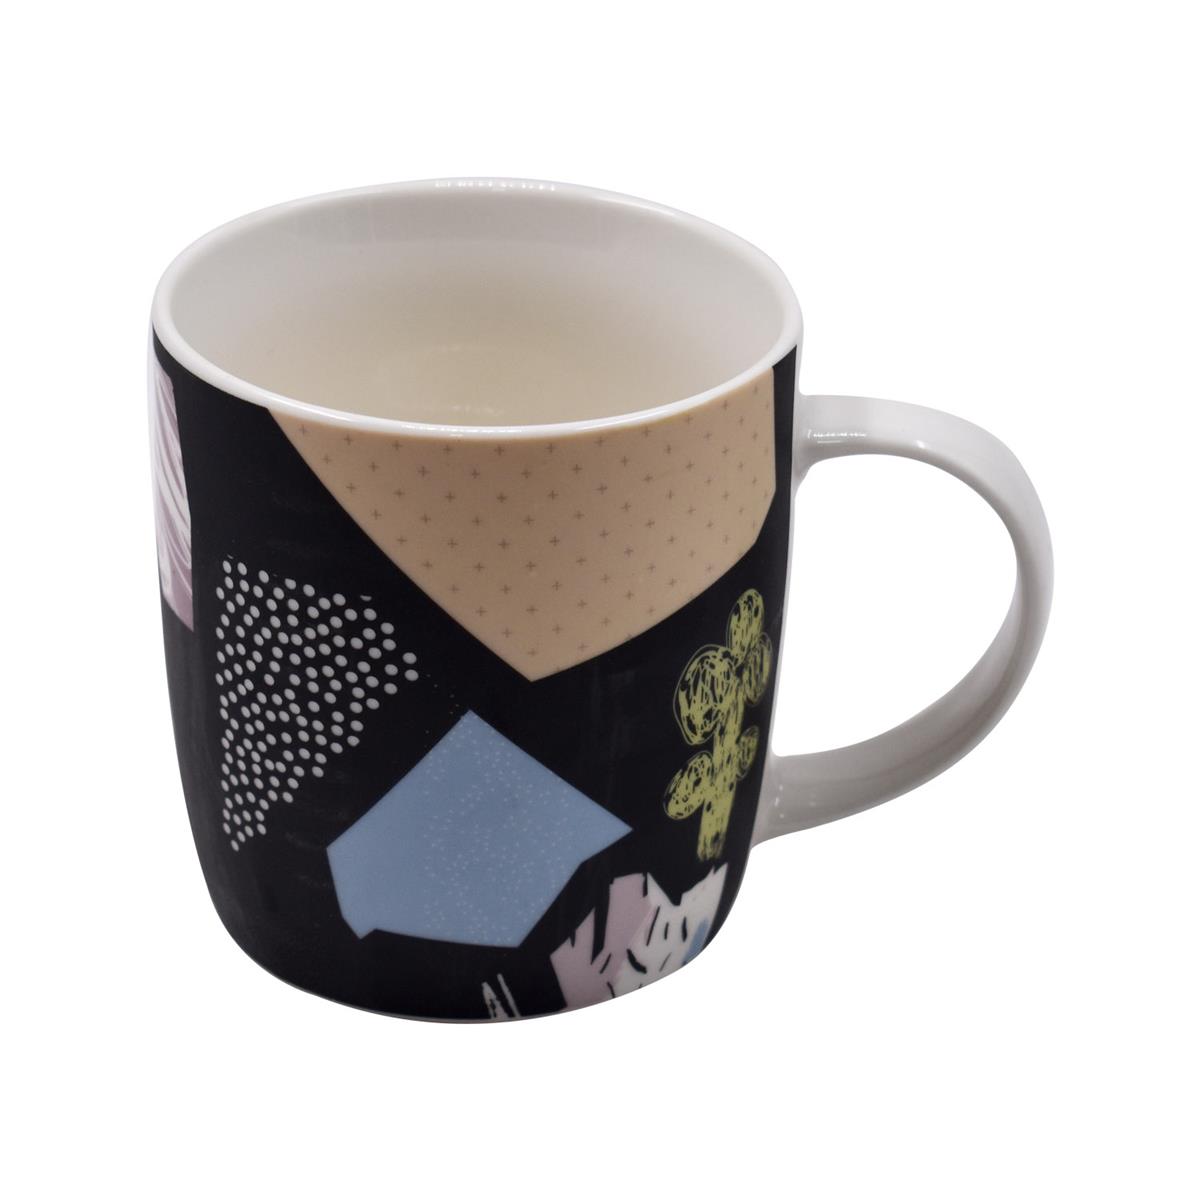 Kookee Ceramic Coffee or Tea Mug with handle for Office, Home or Gifting - 325ml (R4901-A)